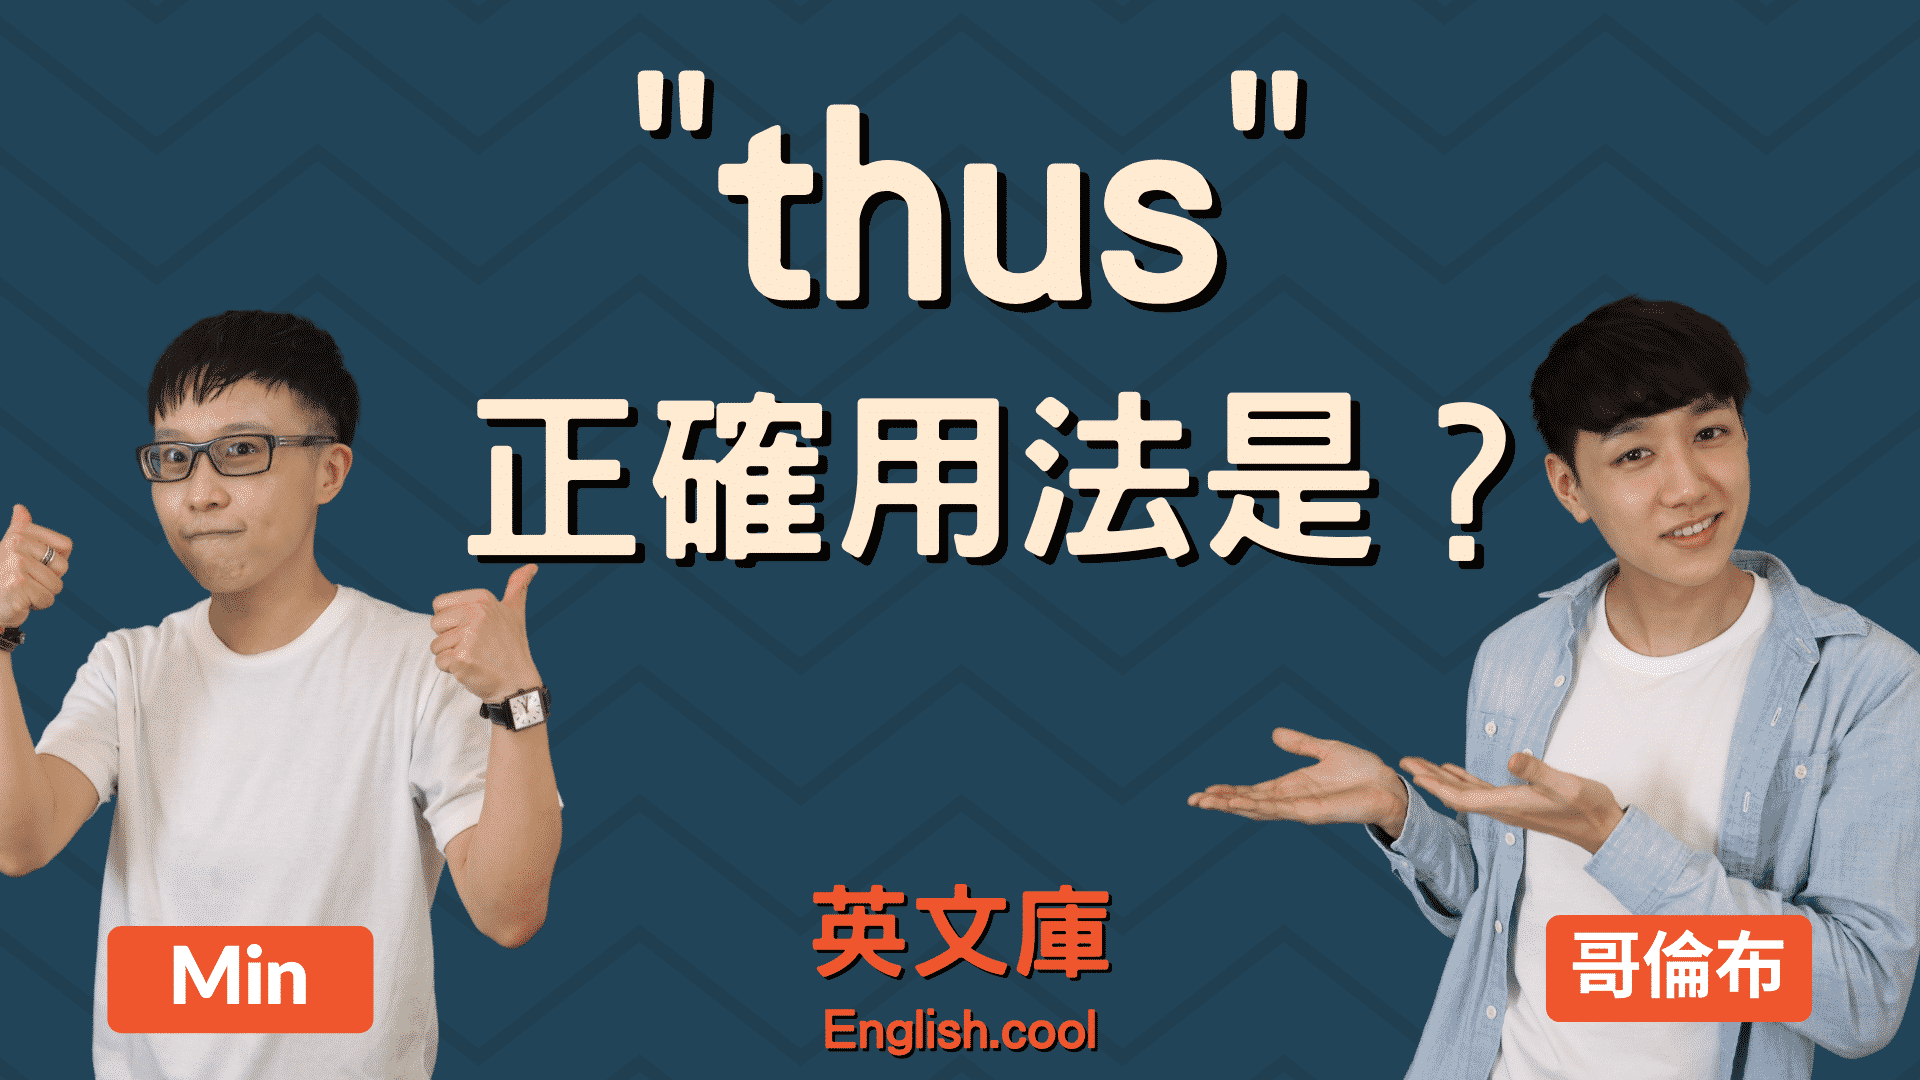 You are currently viewing 「thus」正確用法是？來看例句搞懂！